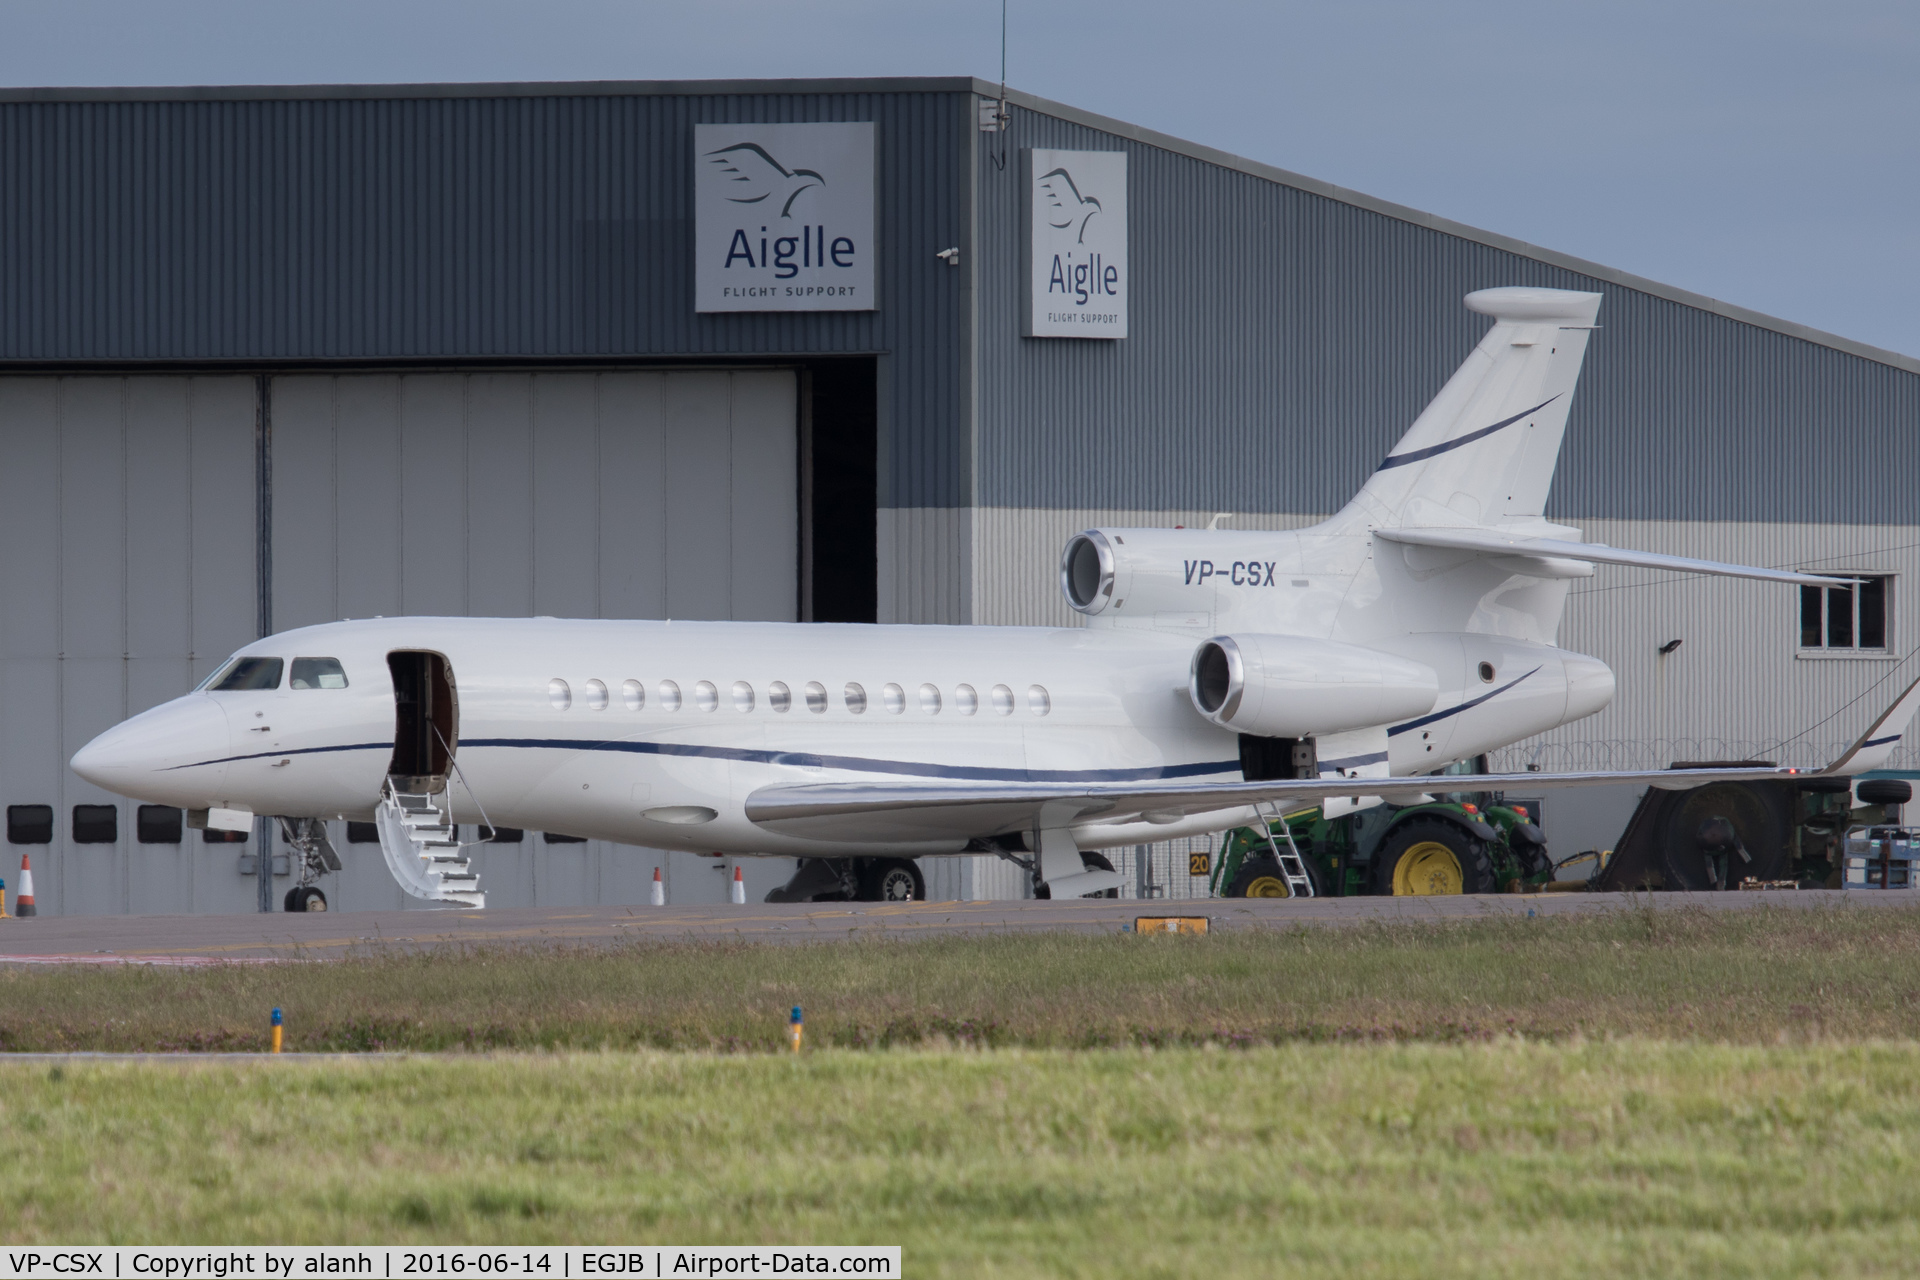 VP-CSX, 2011 Dassault Falcon 7X C/N 147, Parked outside the Aiglle hangar in Guernsey